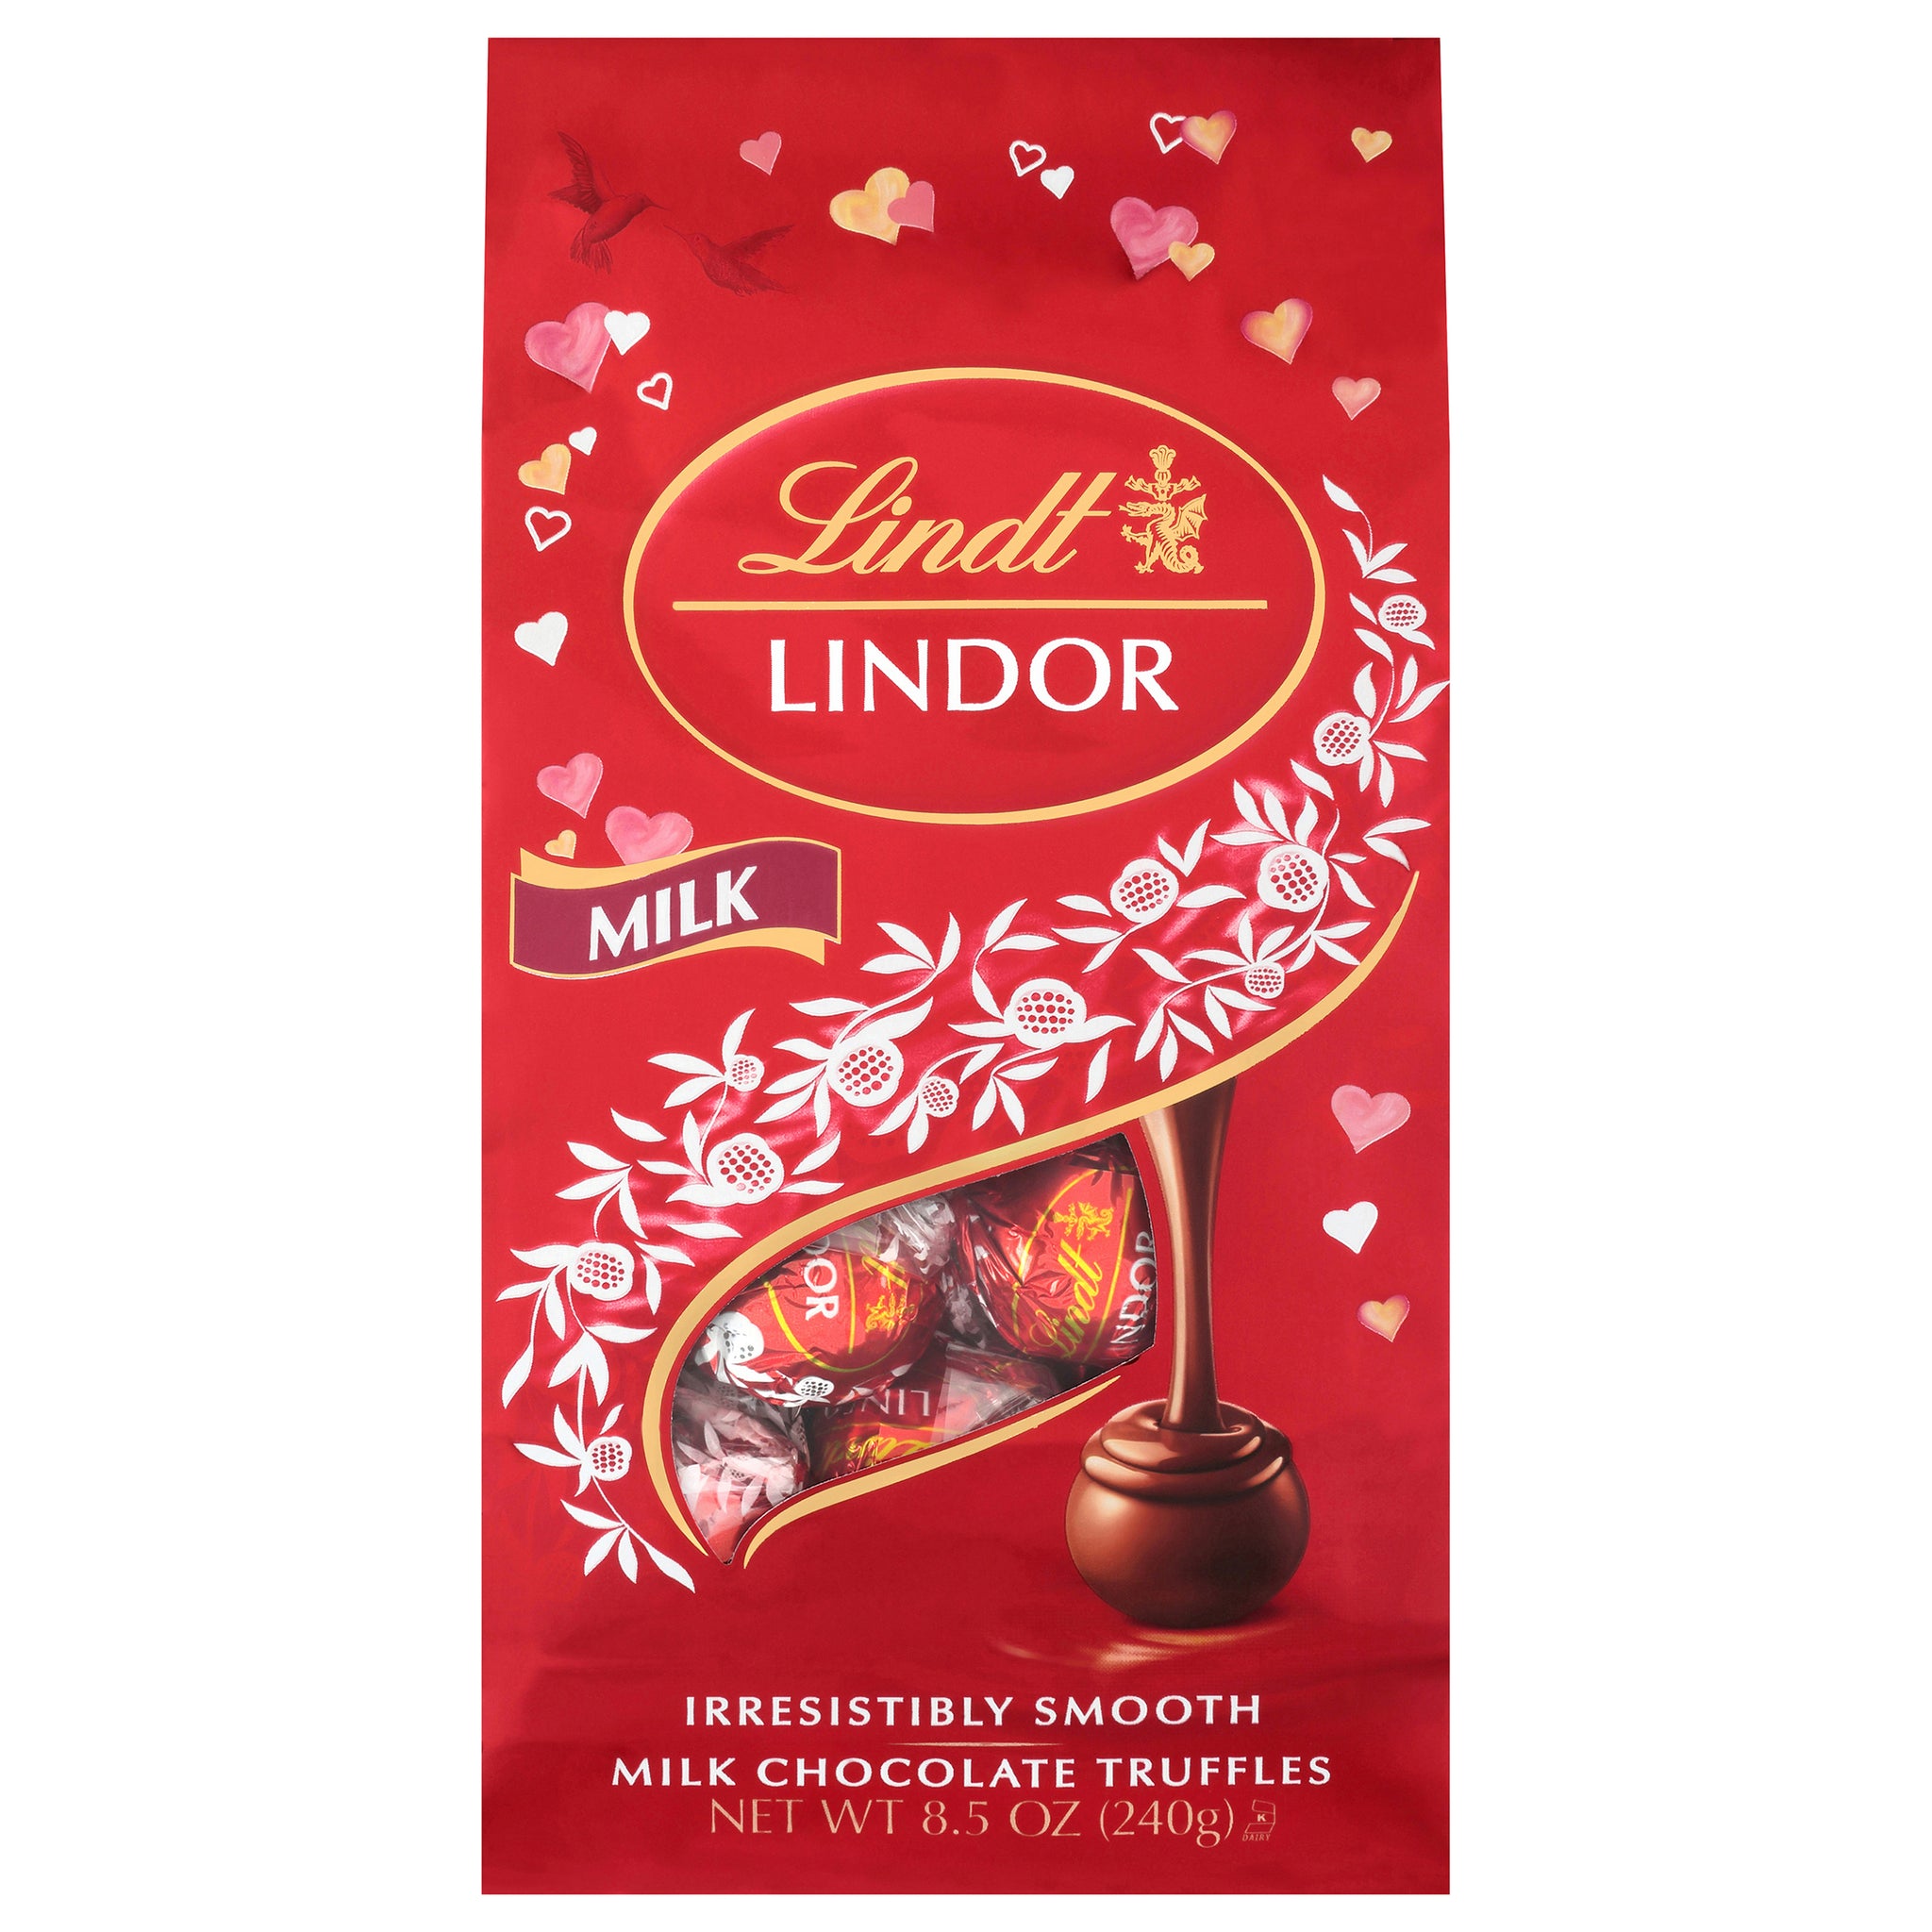 Lindt - Stuck for ideas for Valentines day? LINDOR has you covered 💕  #BlissfromMetoYou | Facebook